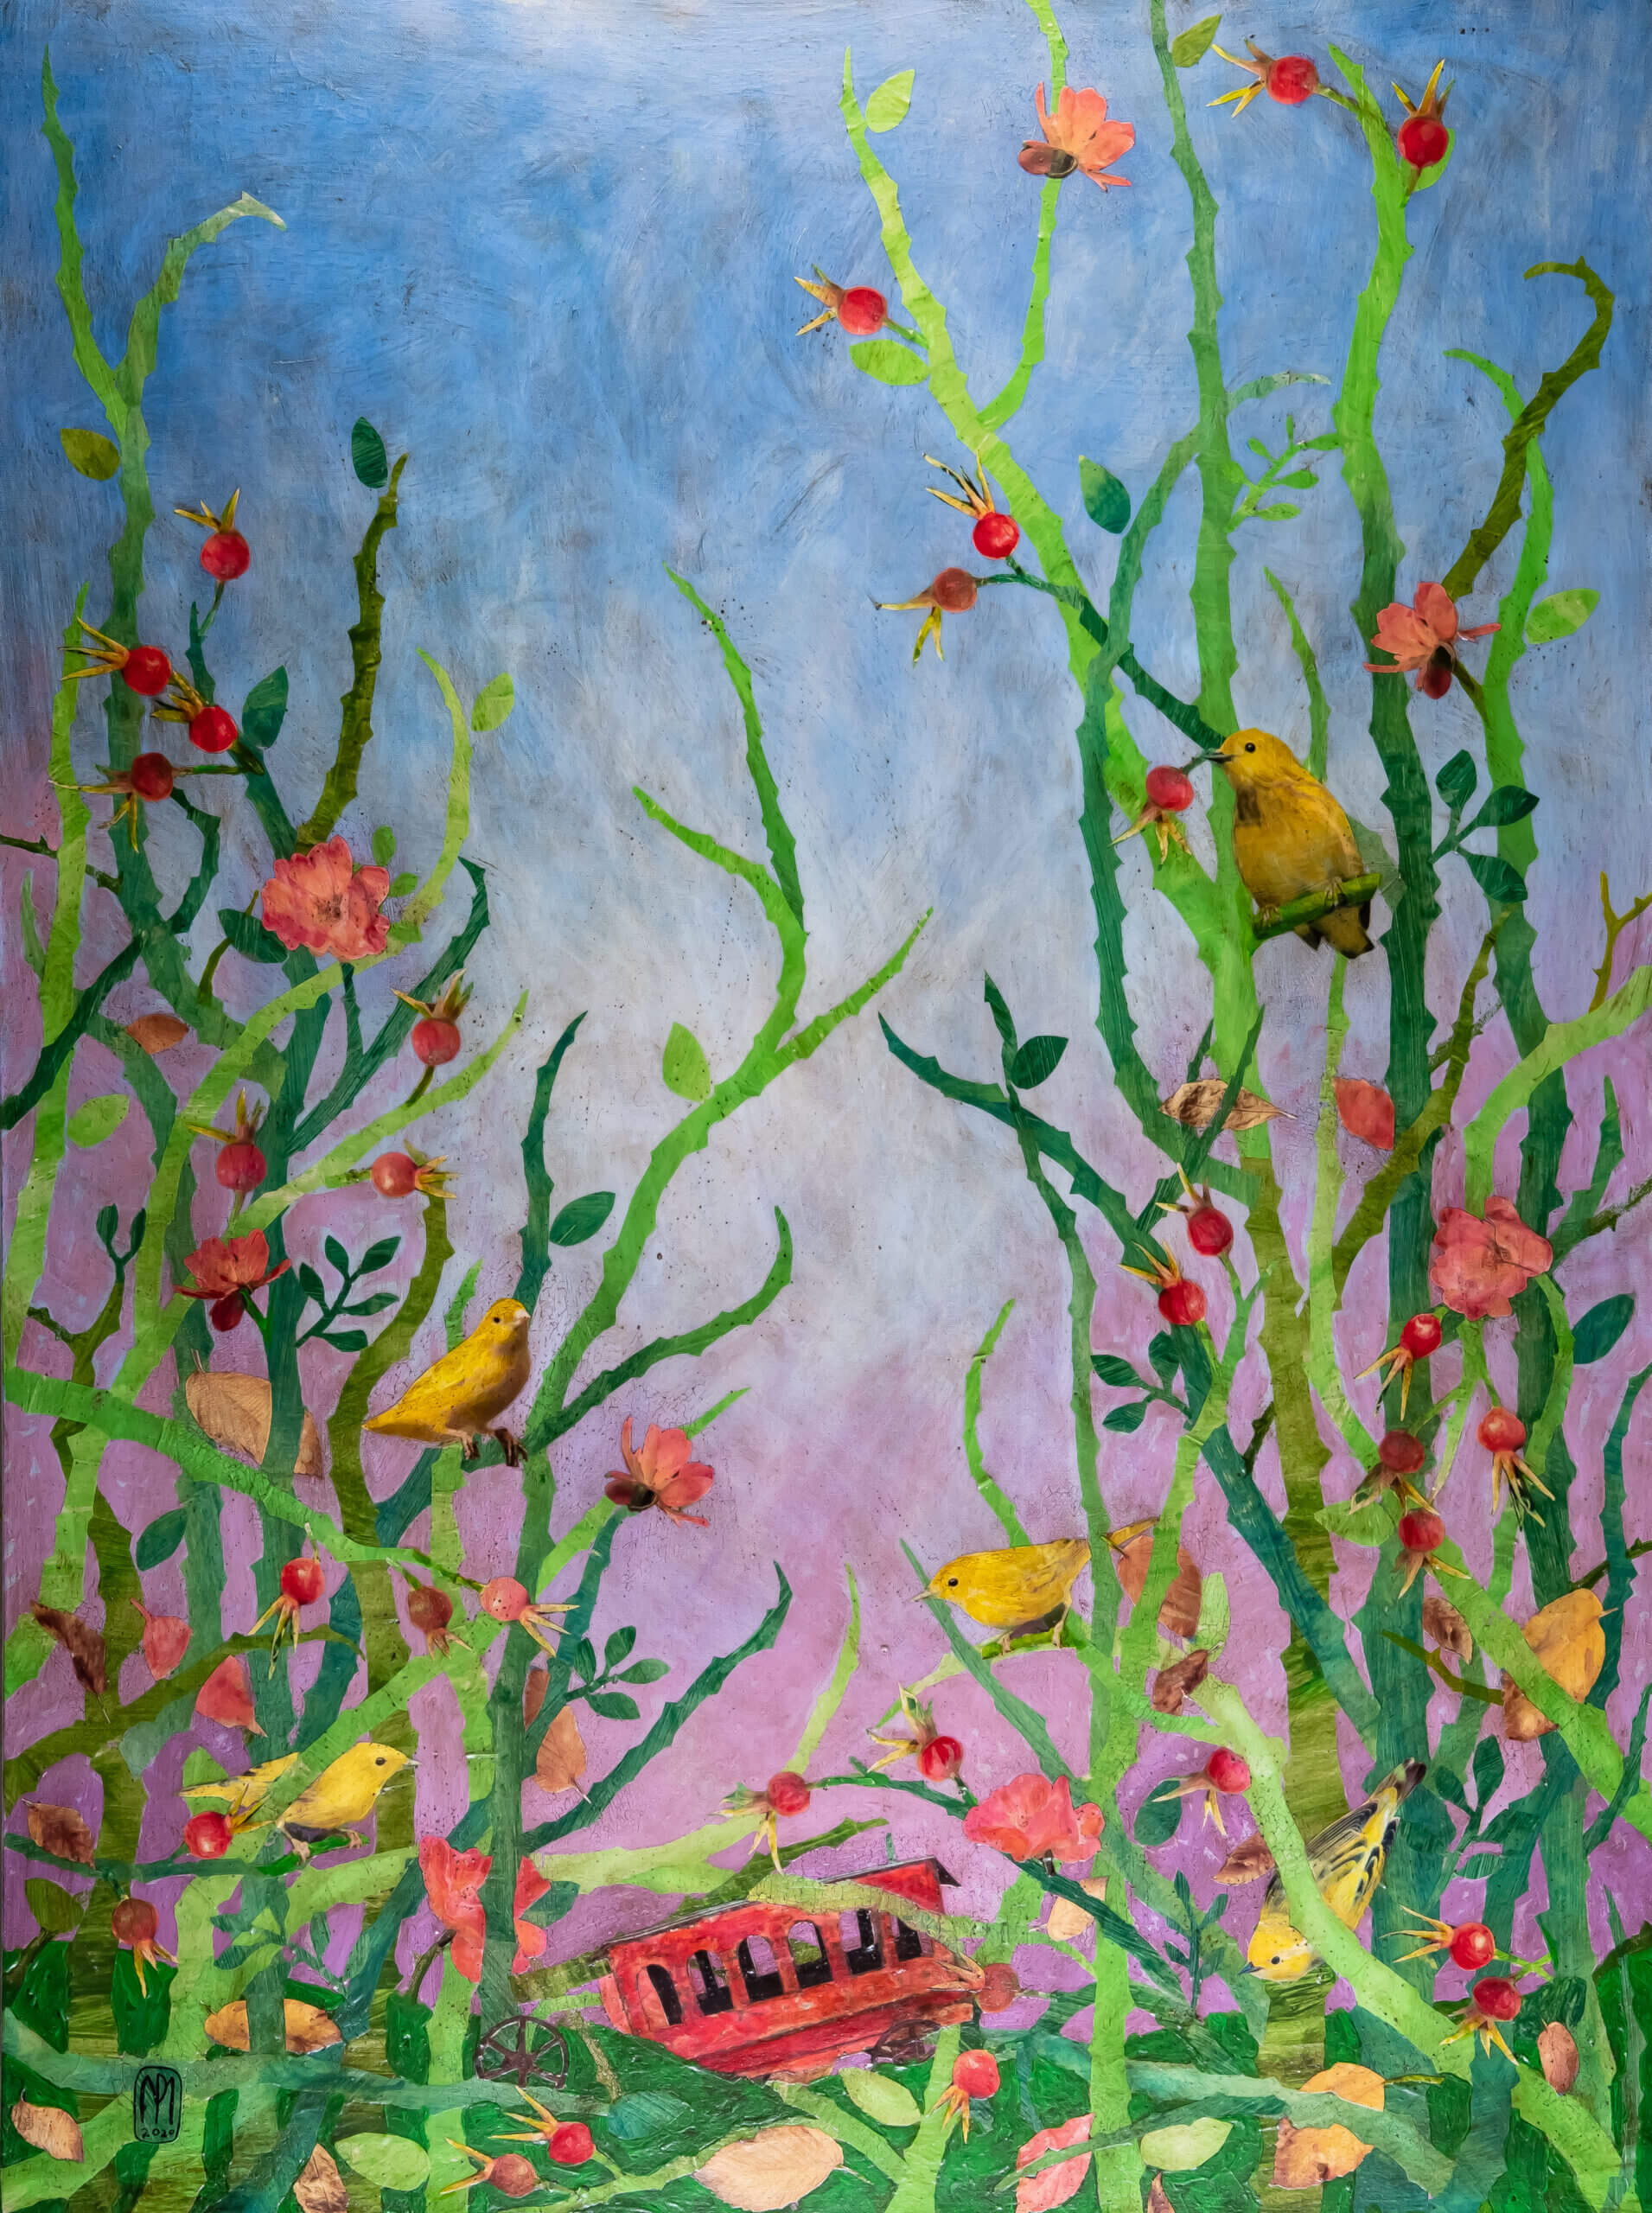 The Briar Series 5 is a 3'x5' collage on canvas depicting a colorful briar patch of green thorny branches against a purple and blue backdrop. Sprinkled throughout are yellow warblers, and pink and red flowers and buds.